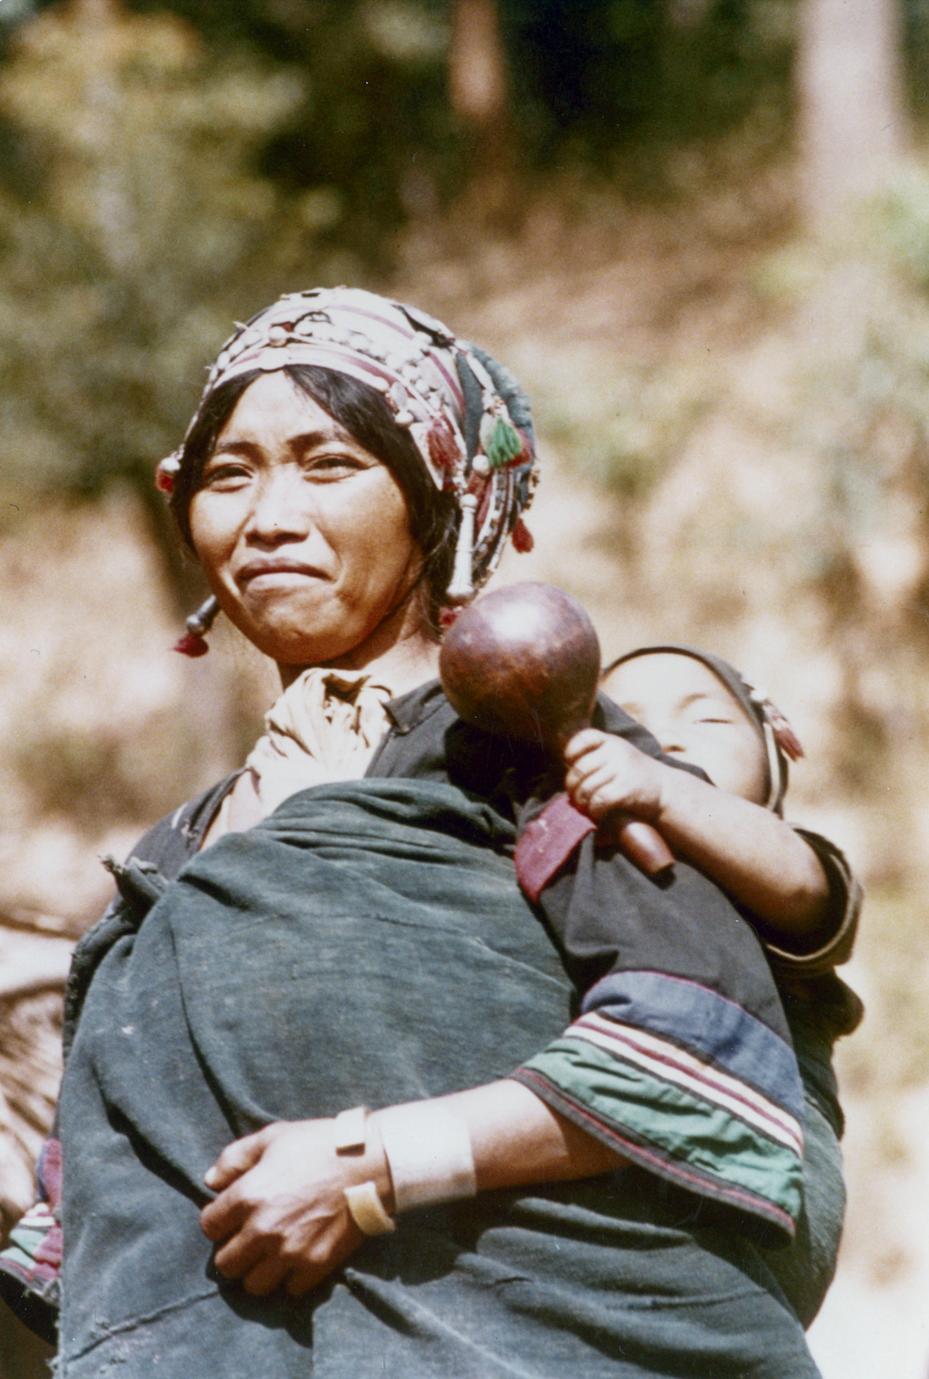 An Akha woman with baby and gourd rattle at the village of Sobloi in Houa Khong Province